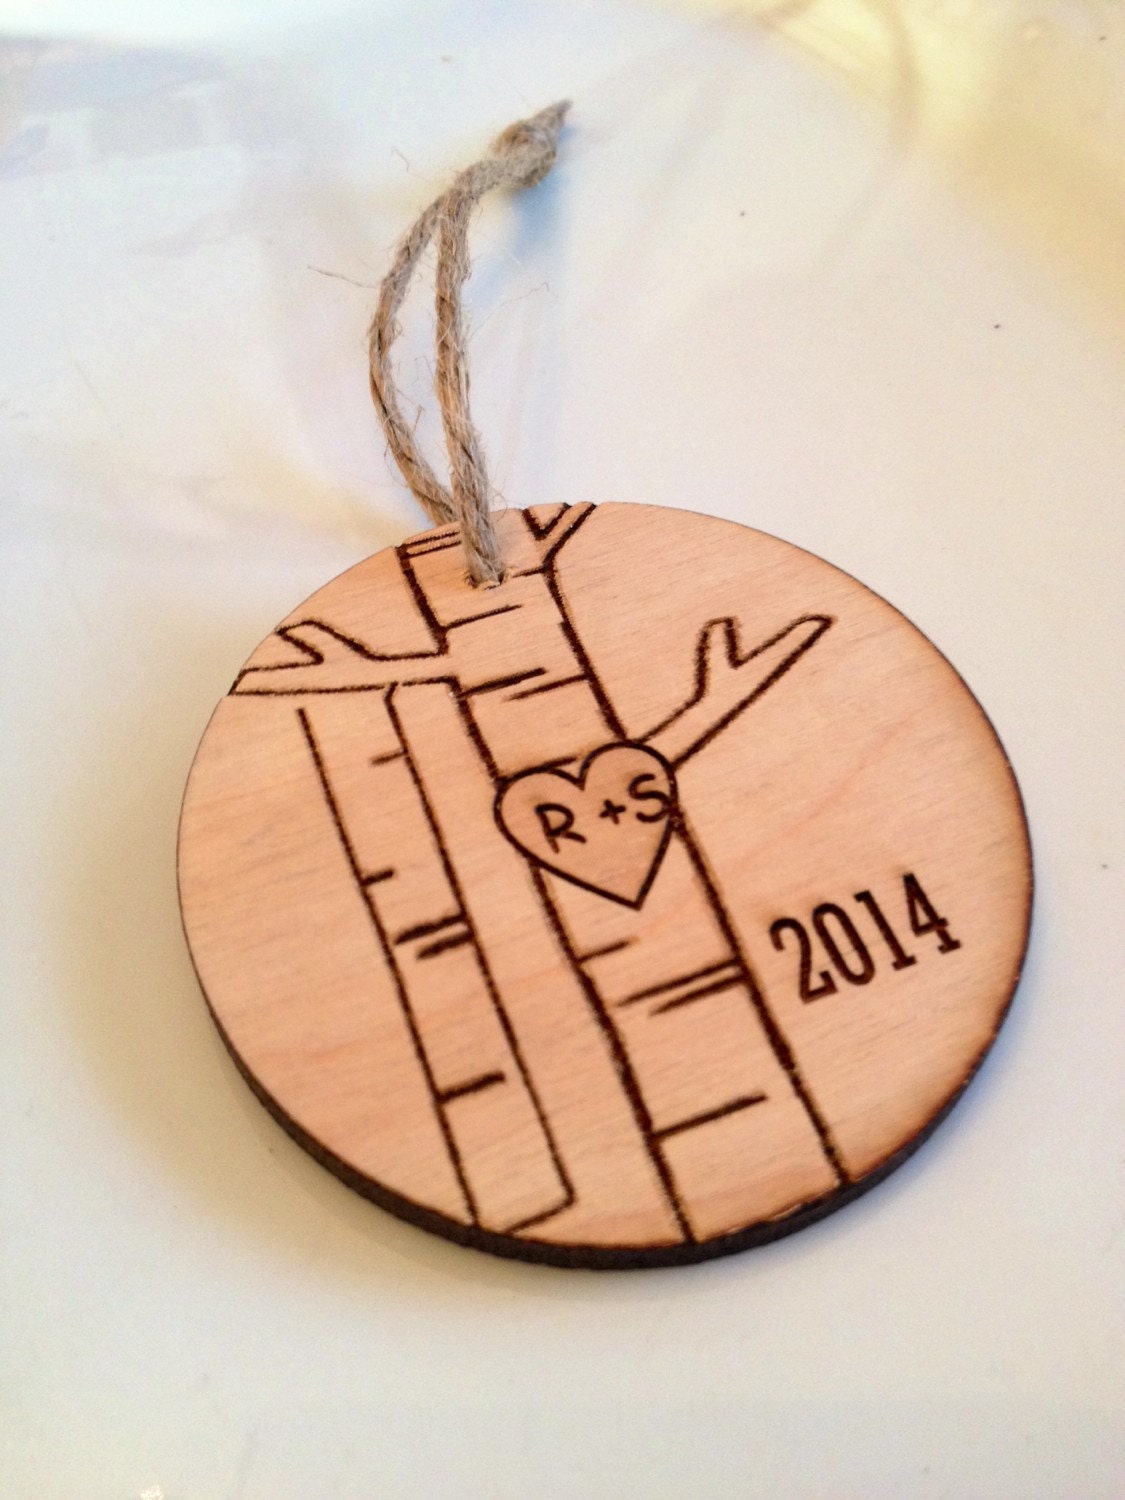 Personalized Christmas ornament engraved by Sweetpinehills on Etsy